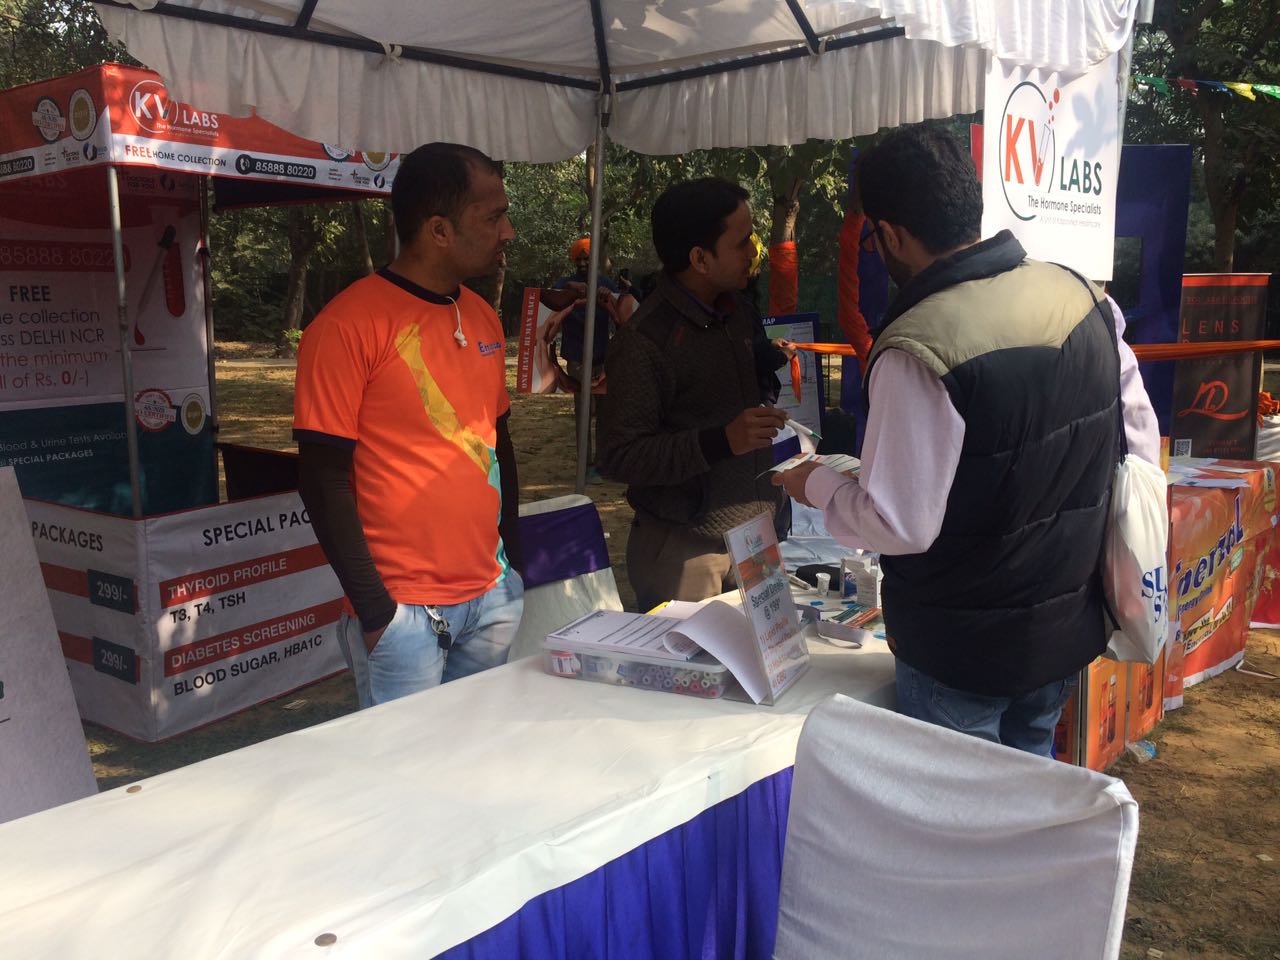 KV Labs participated in expo by Super Sikh Run